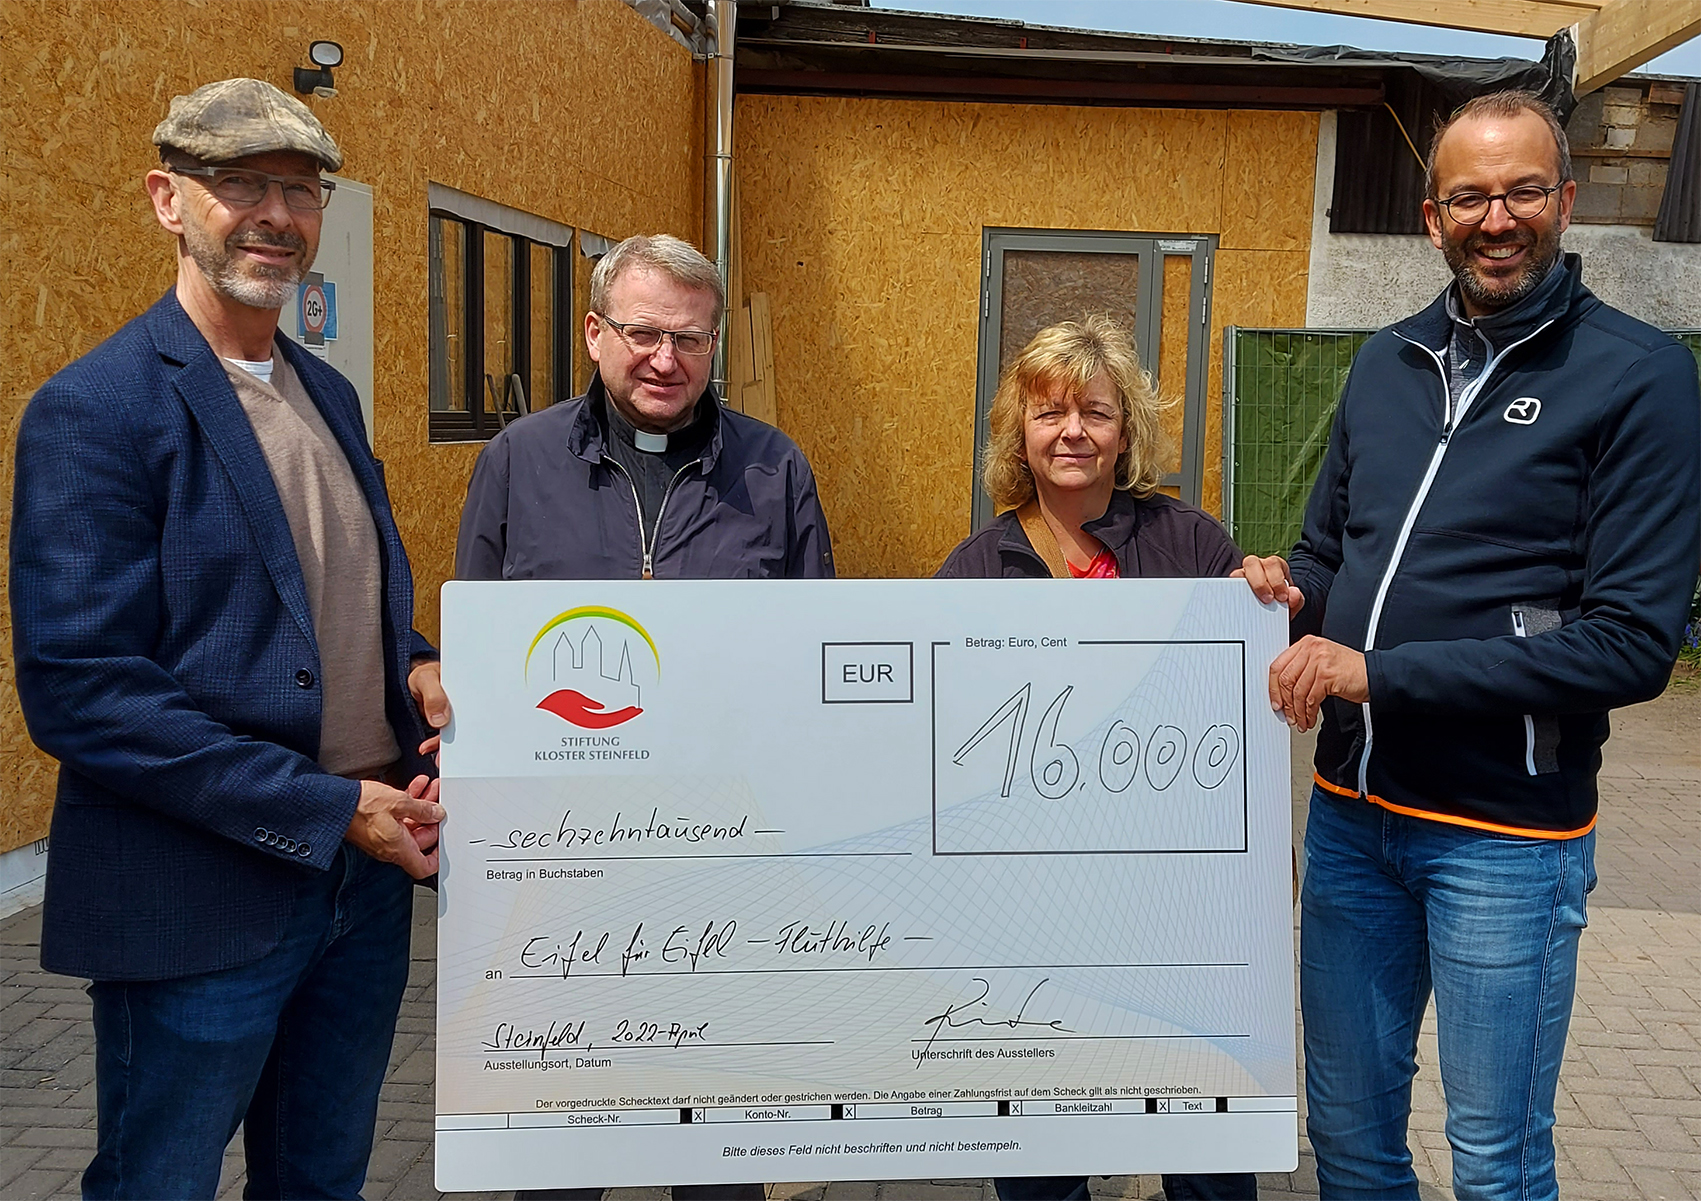 Cheque presentation - support for flood victim aid